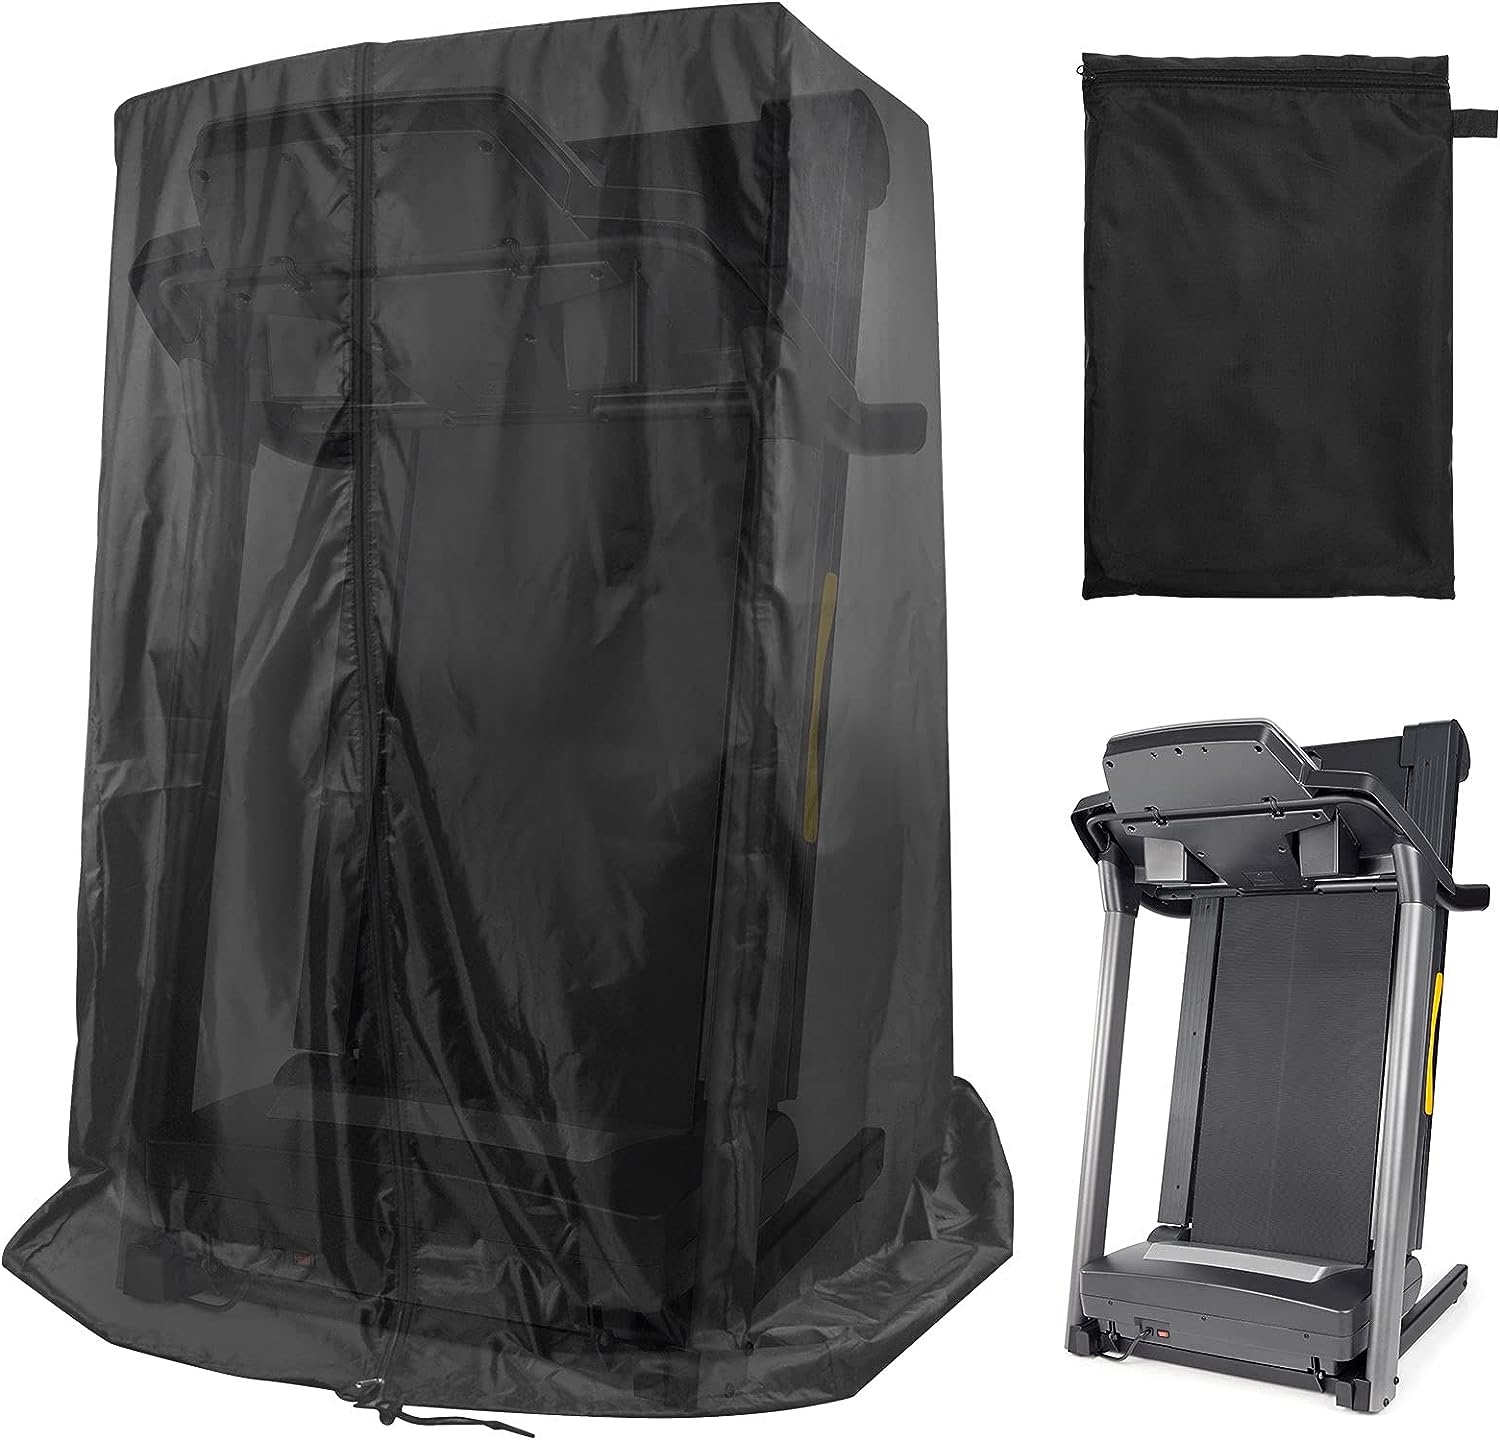 Black Treadmill Cover 46 L x 38 W x 66 H, Luxiv Dustproof Waterproof Cover for Treadmill Fold-able Cover for Indoor Outdoor Sunscreen Treadmill Cover with Storage Bag